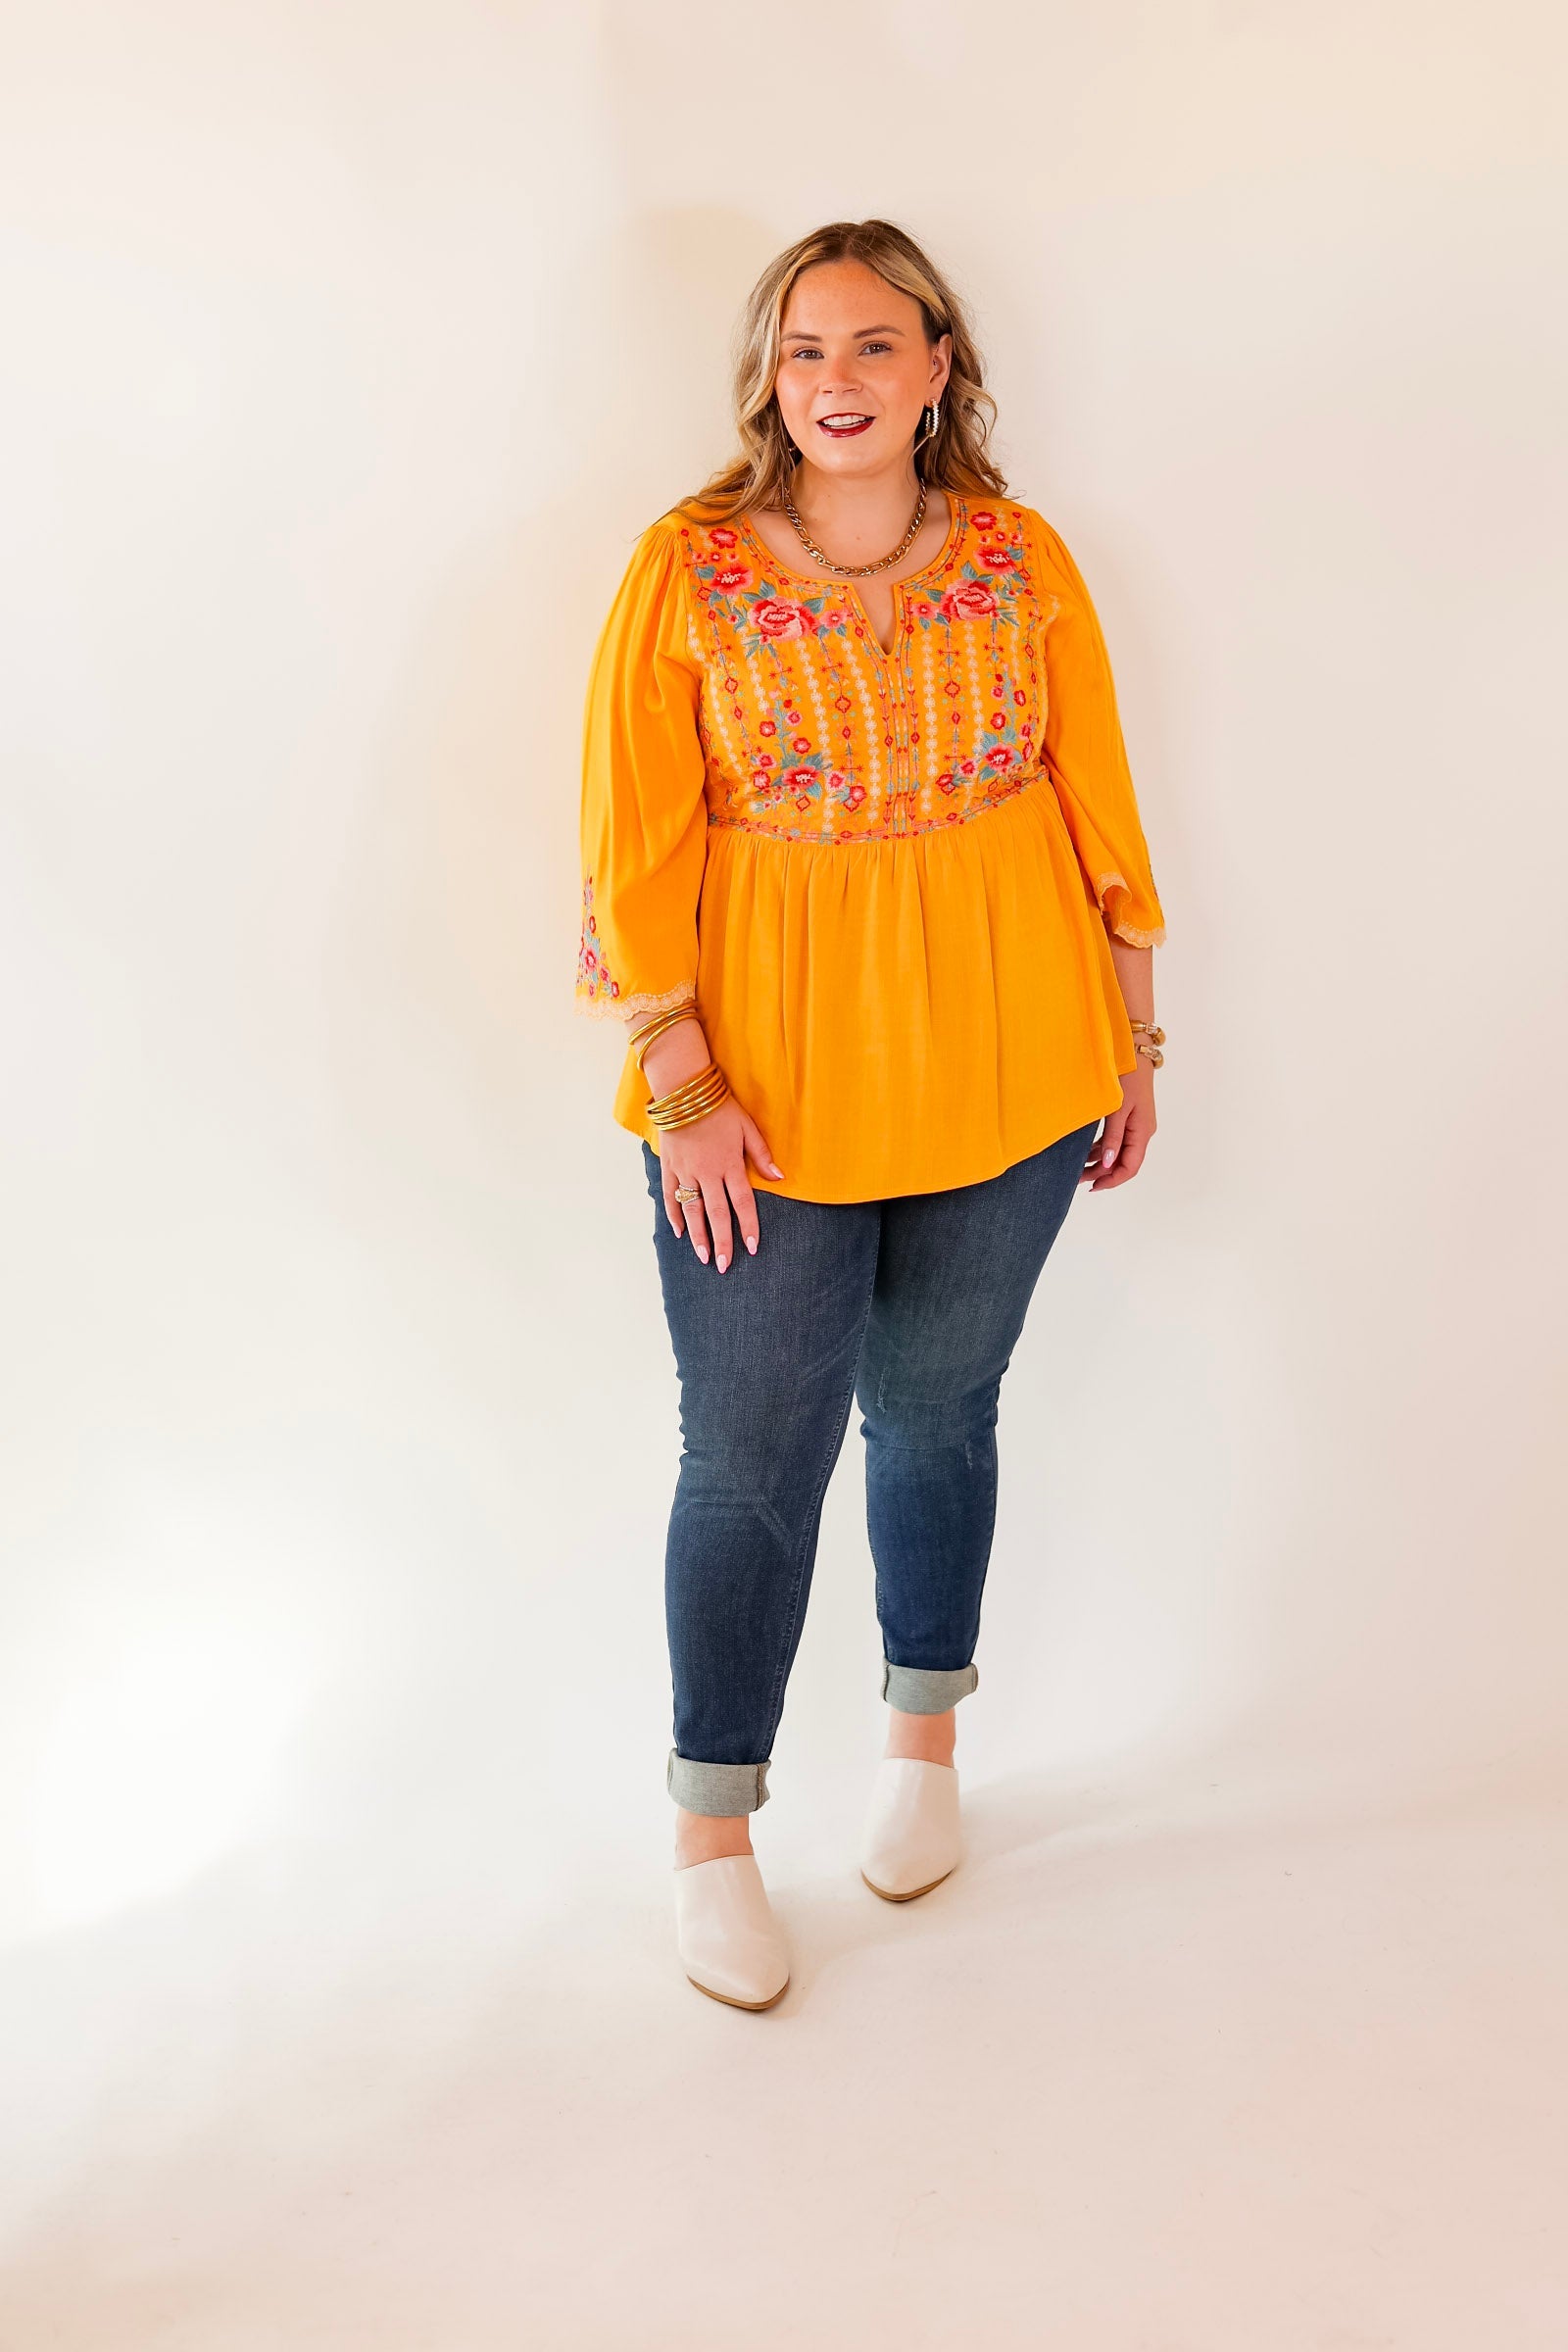 Already Mine 3/4 Bell Sleeve Embroidered Babydoll Top in Yellow - Giddy Up Glamour Boutique